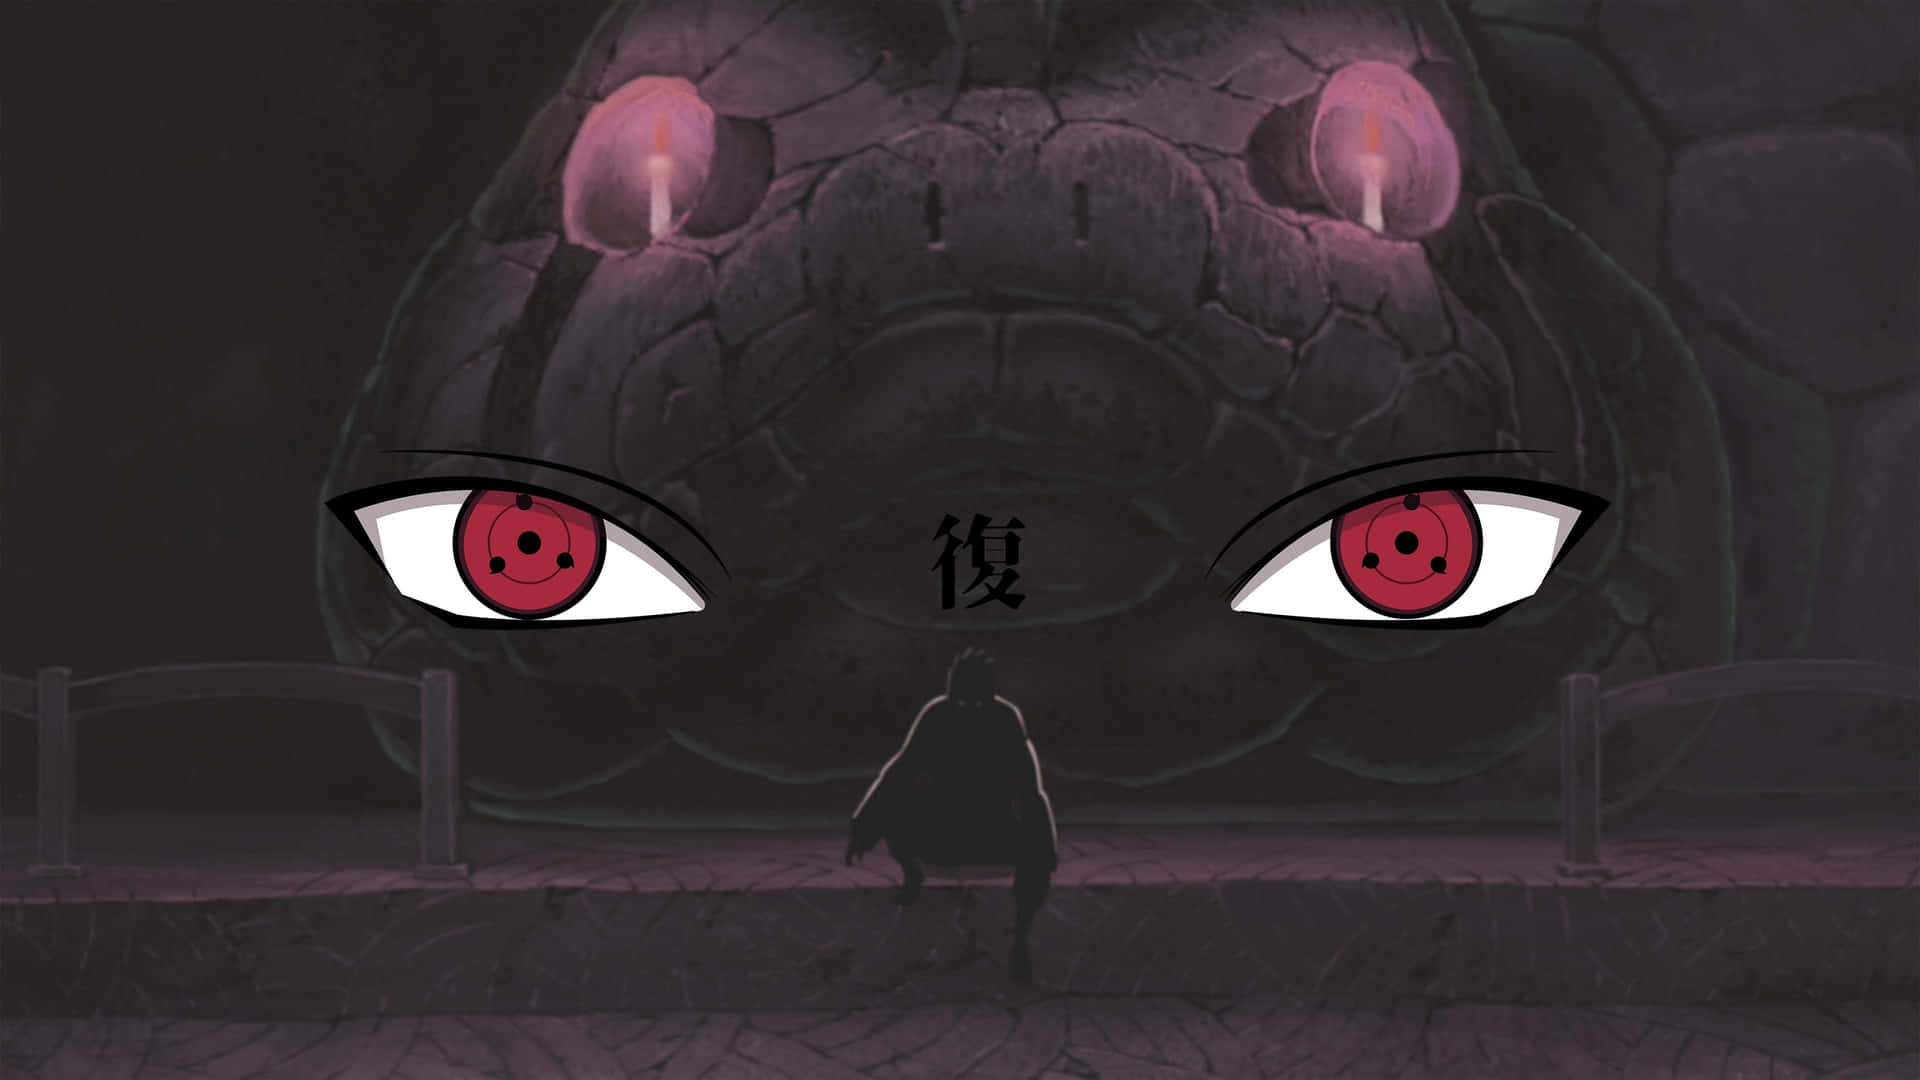 "The Powerful Pain of the Shadow: Naruto" Wallpaper